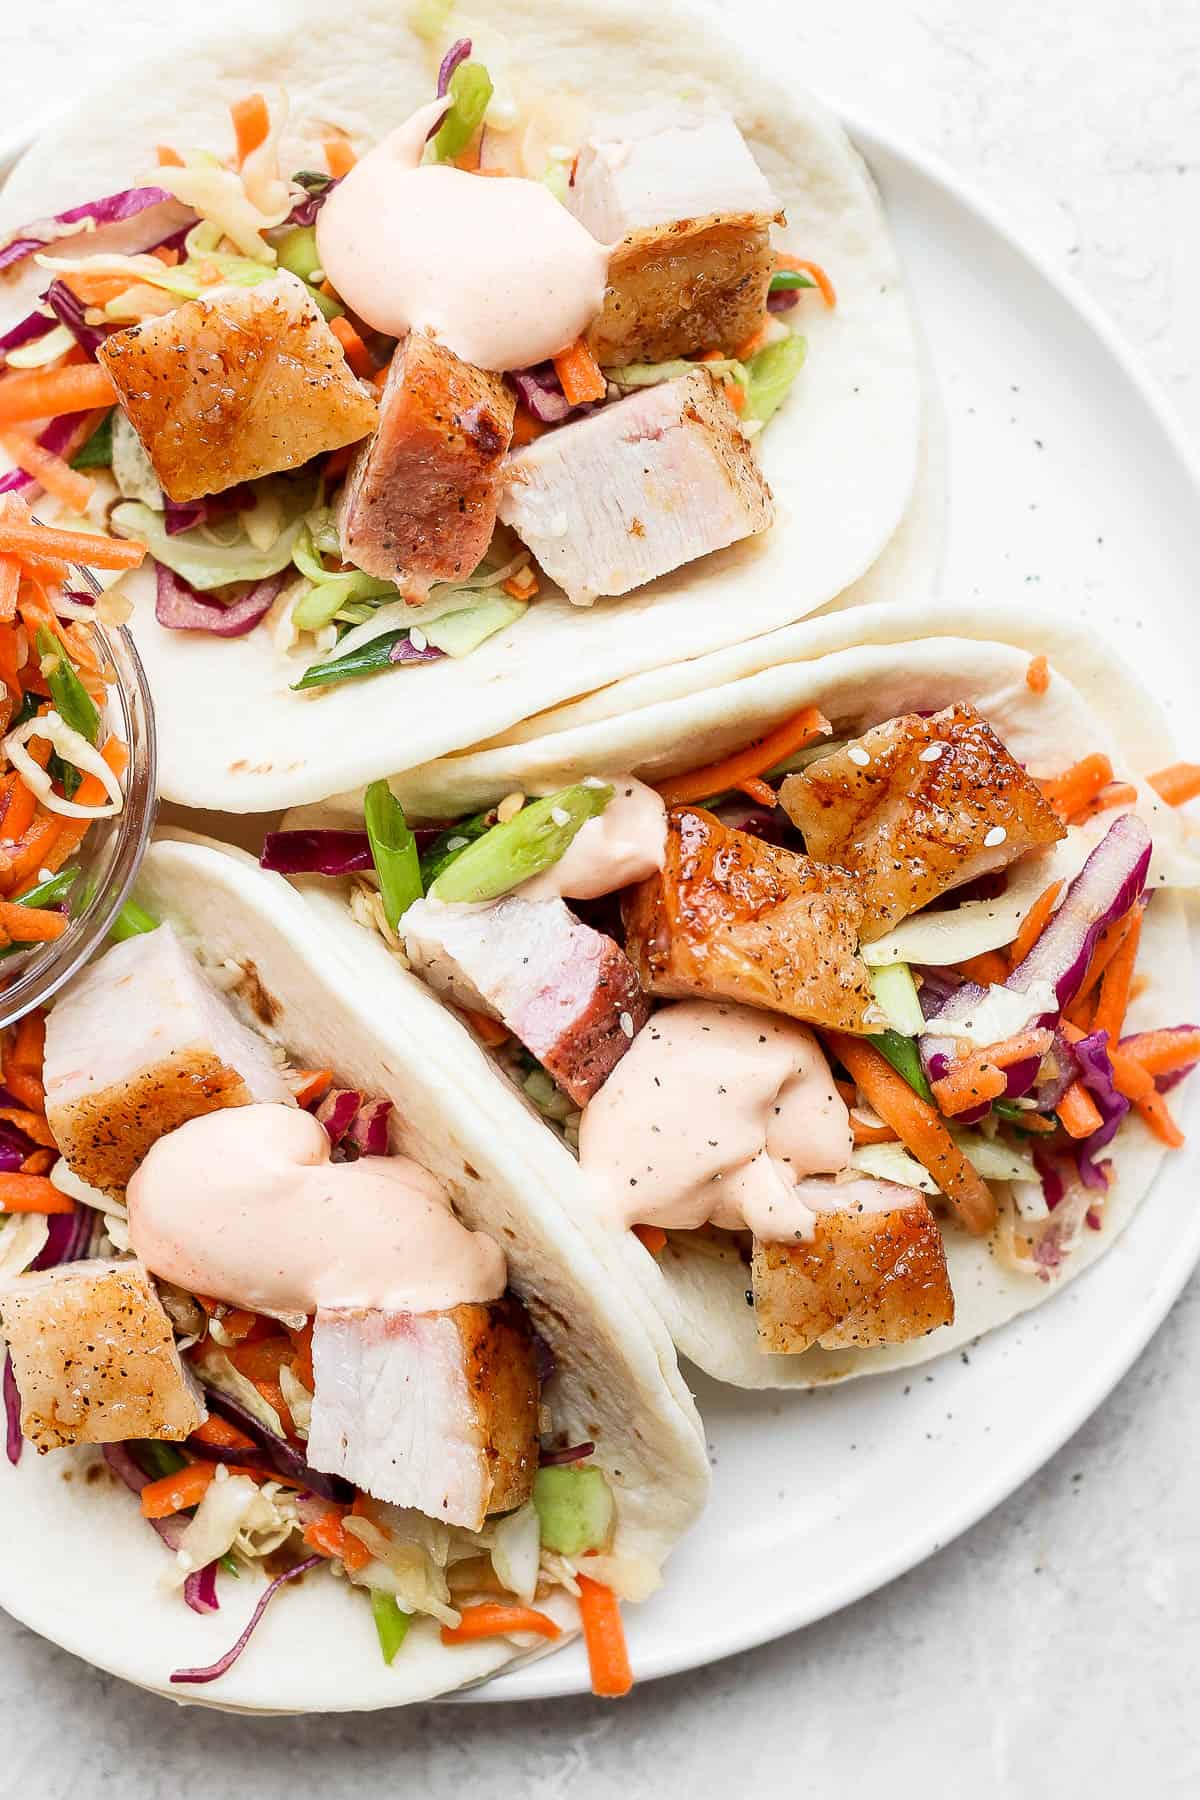 Plate of pork belly tacos.